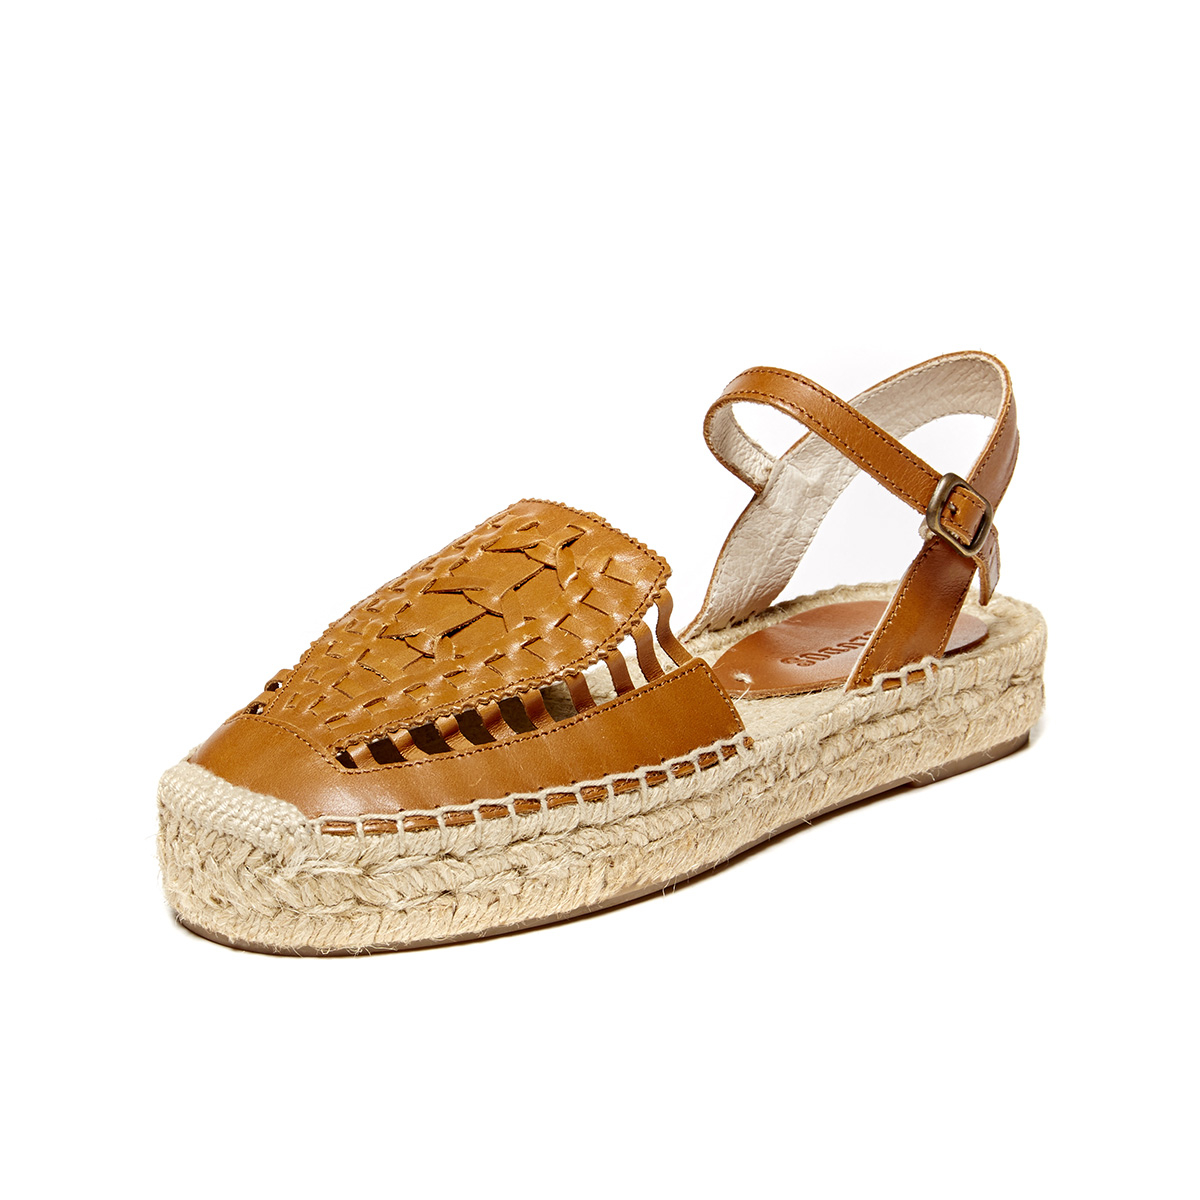 Lyst - Soludos Leather Platform Huarache Sandal in Brown